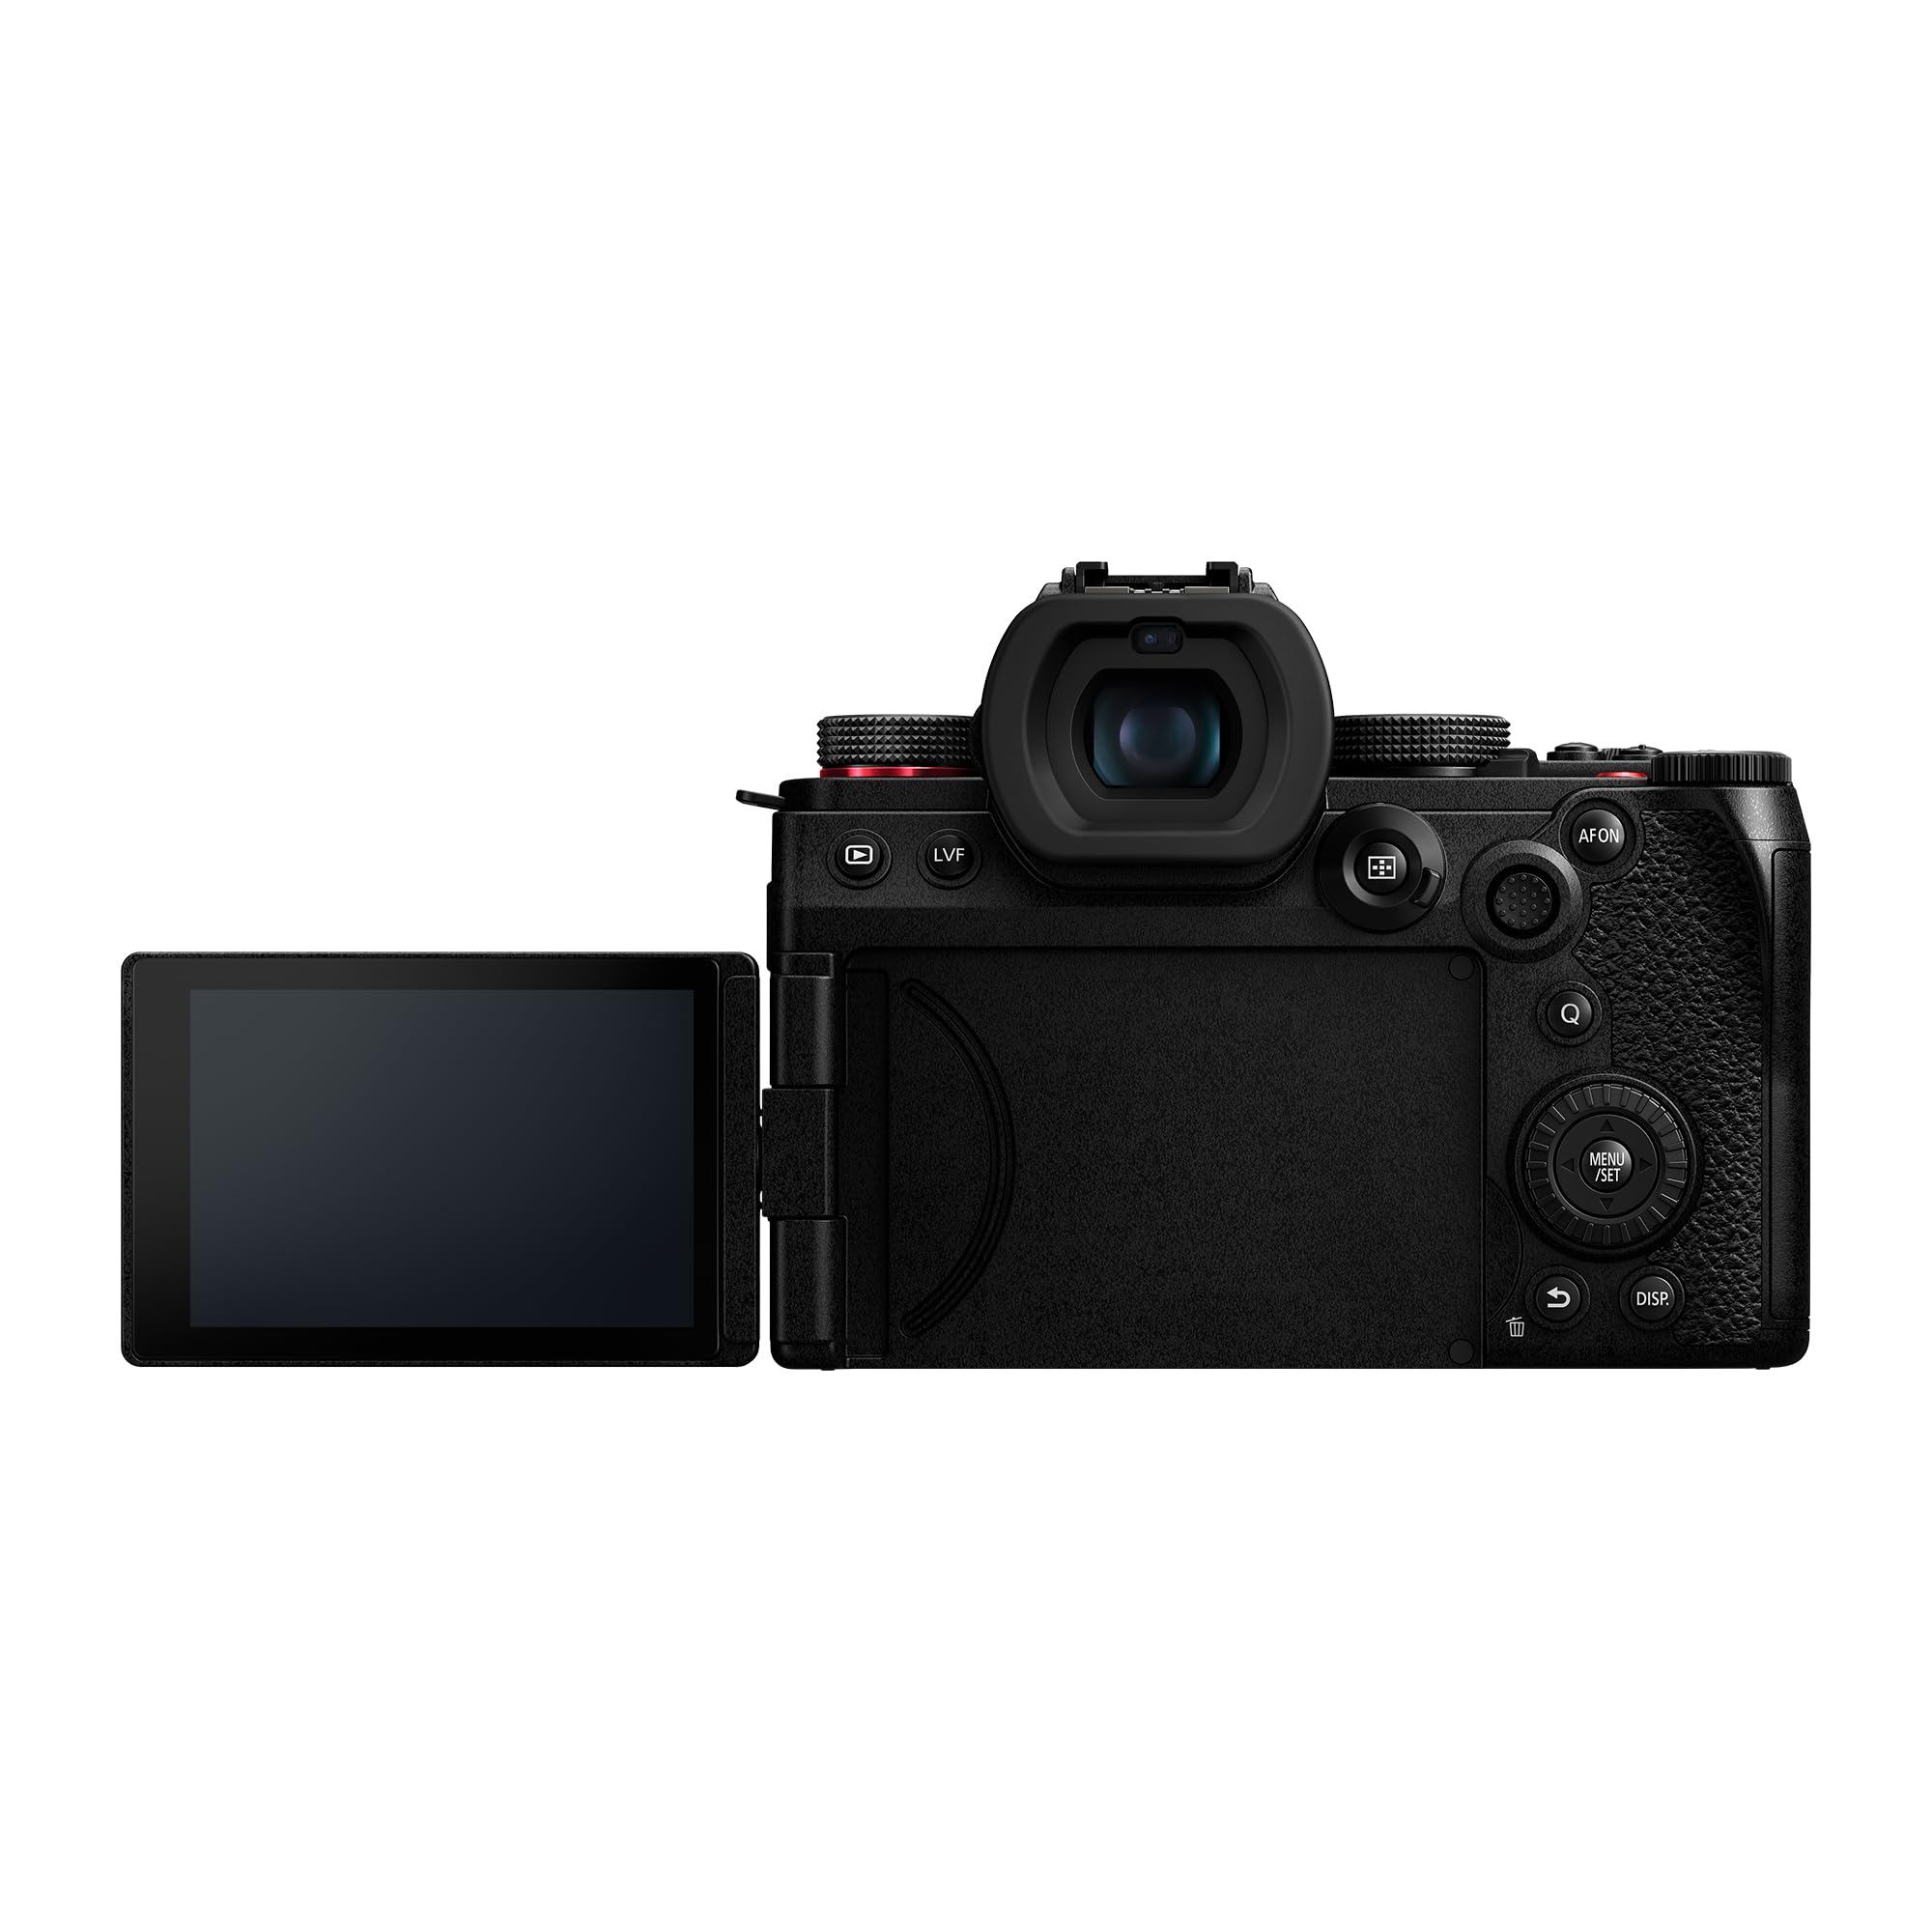 Panasonic LUMIX G9II Micro Four Thirds Camera, 25.2MP Sensor with Phase Hybrid AF, Powerful Image Stabilization, High-Speed Perfomance and Mobility with 12-60mm F2.8-4.0 Lens - DC-G9M2LK